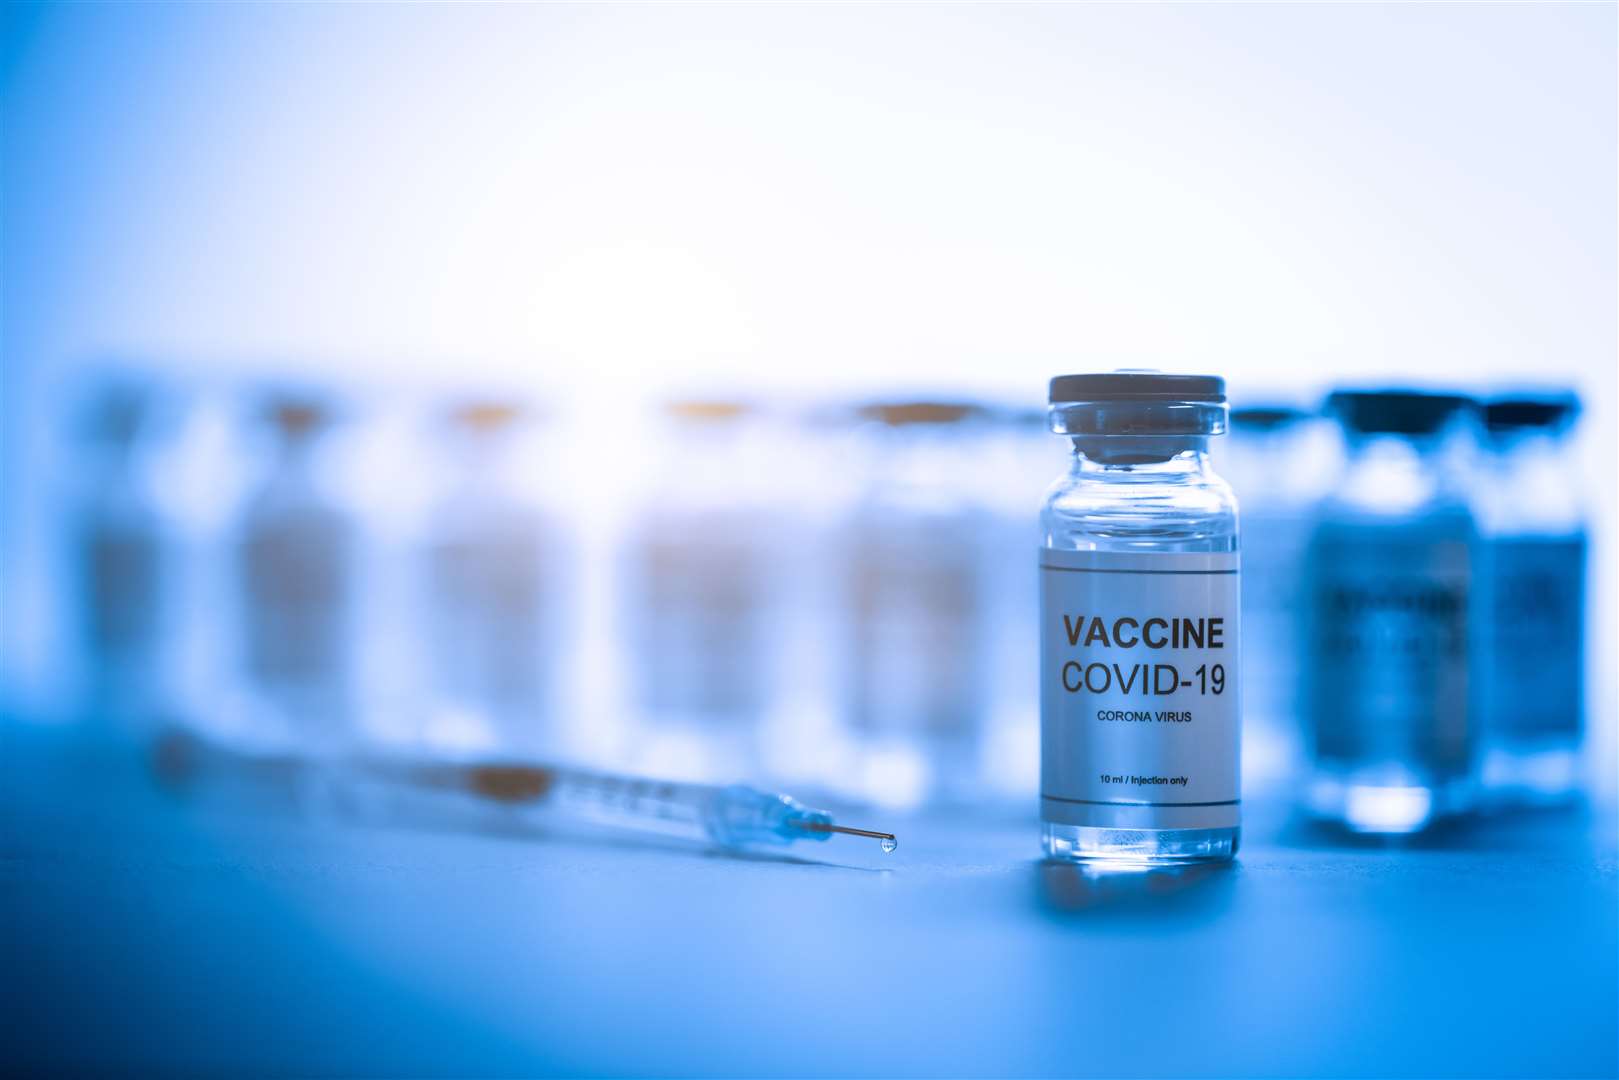 Vials with the Covid-19 coronavirus vaccine ready to be distributed